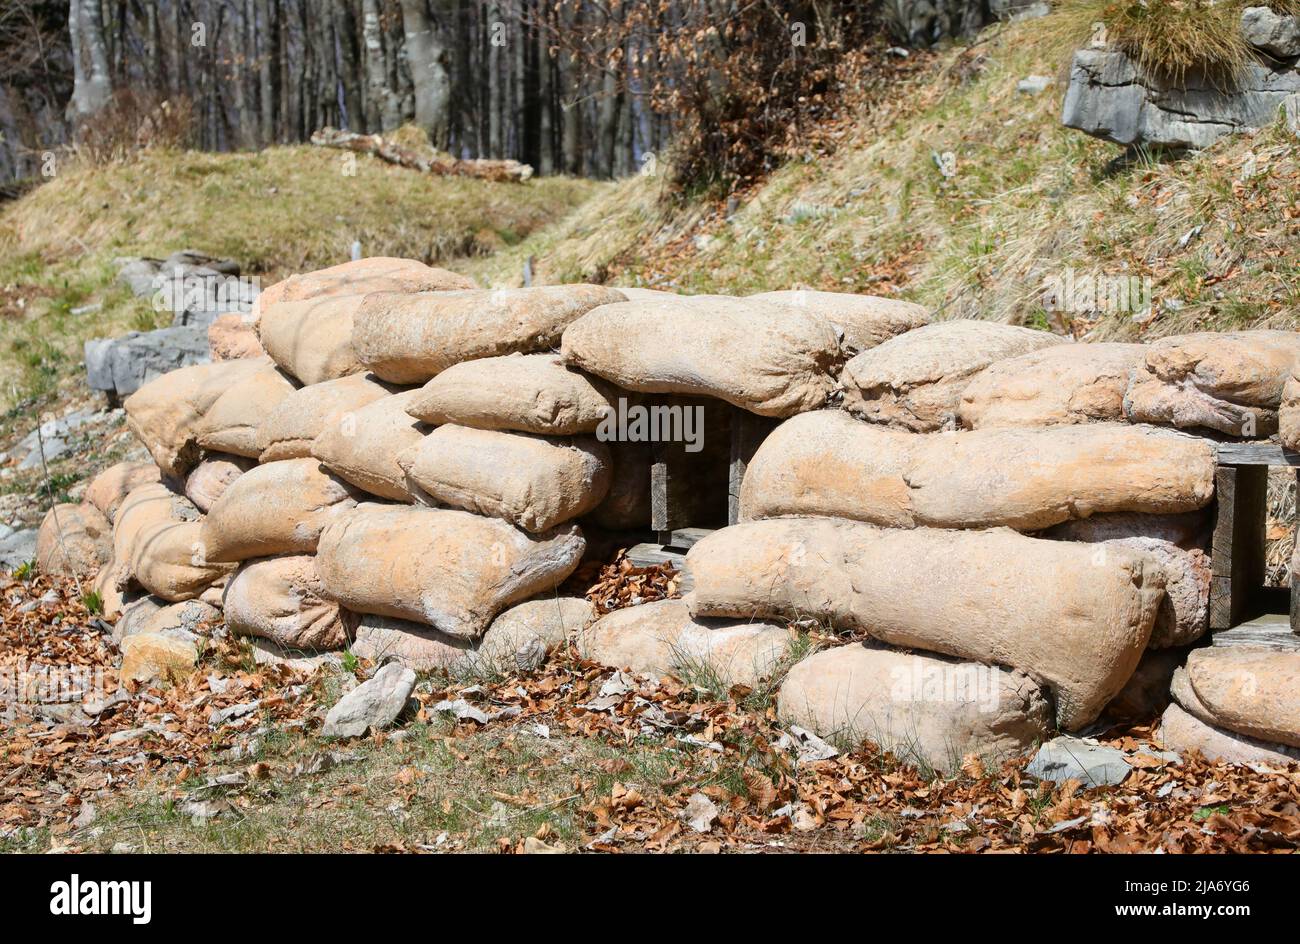 Sandbags for the protection of the war trenches dug into the mountain by the soldiers army Stock Photo